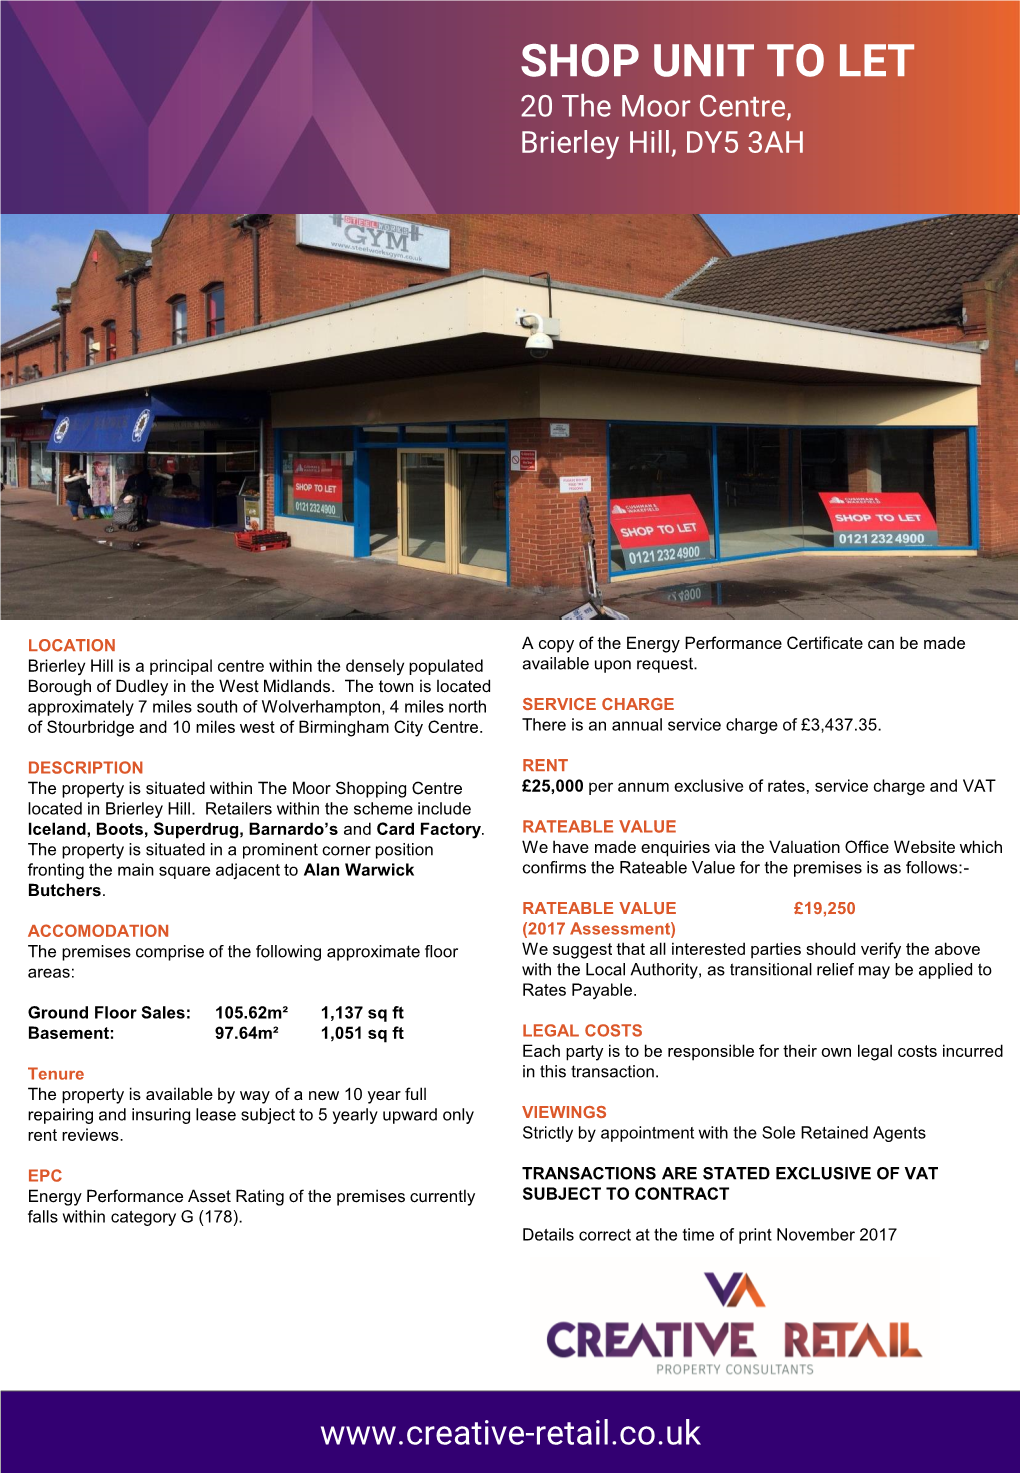 SHOP UNIT to LET 20 the Moor Centre, Brierley Hill, DY5 3AH